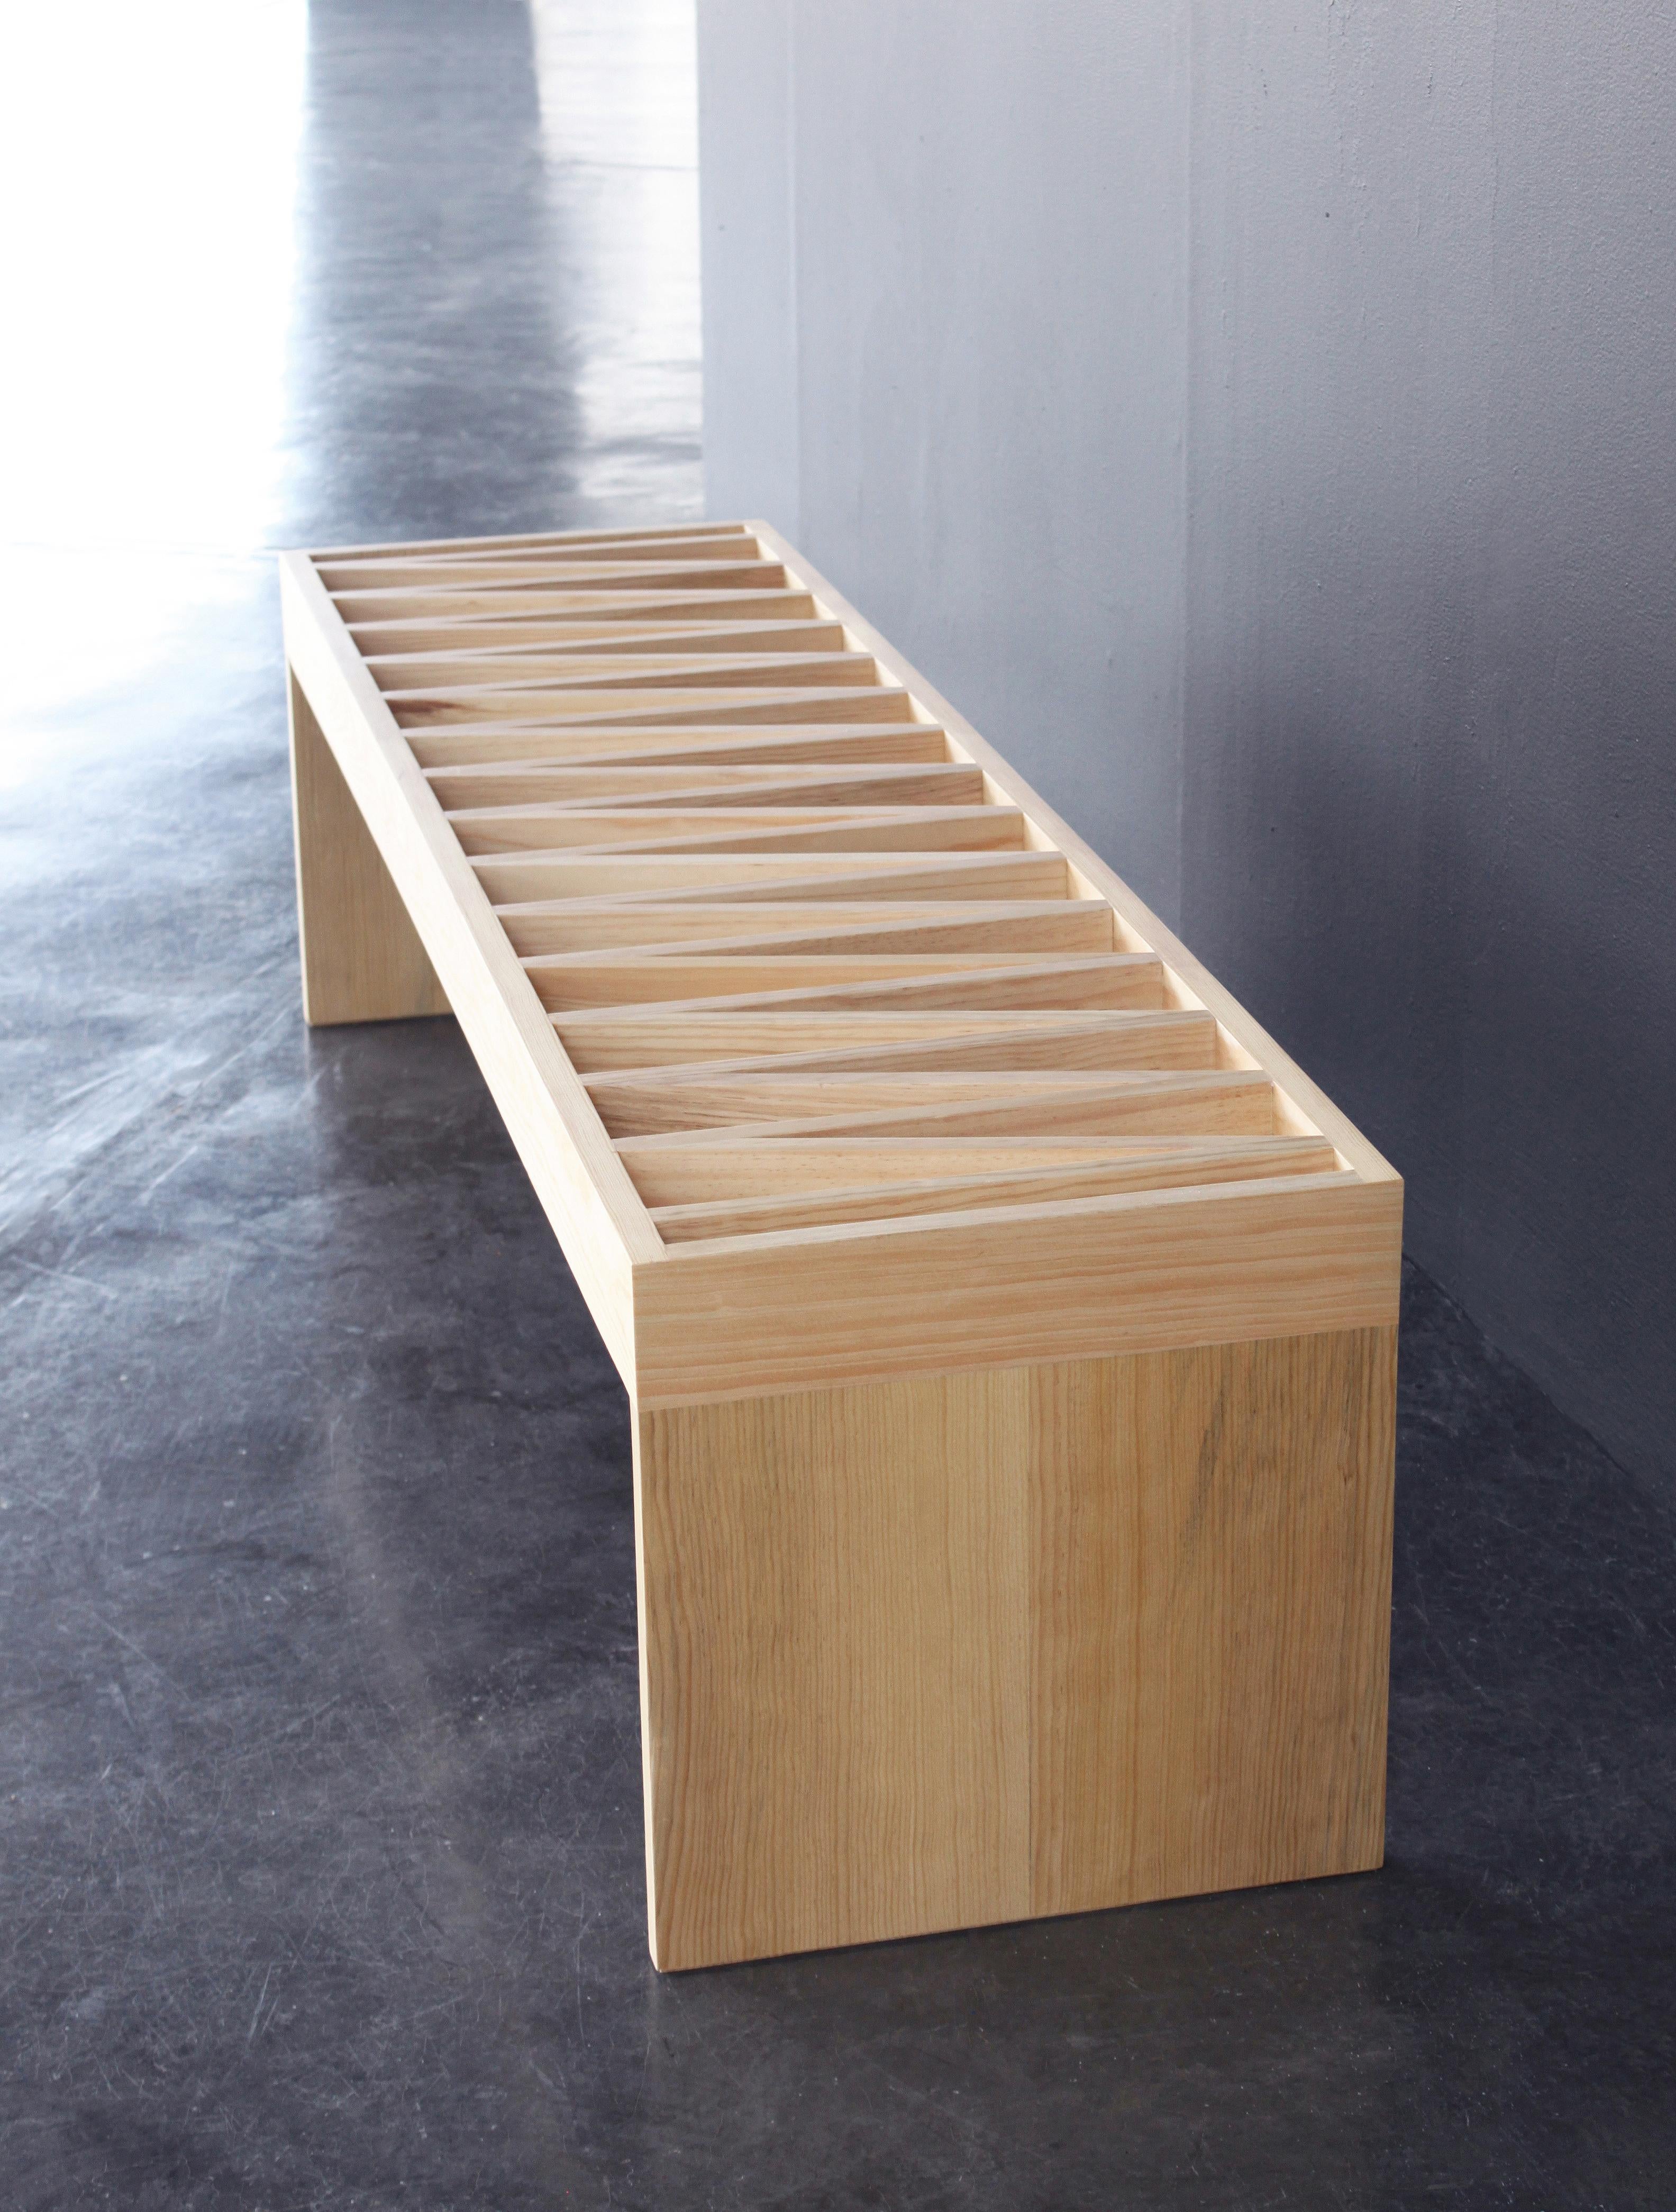 Mexican Banca Mia Bench by Maria Beckmann, Represented by Tuleste Factory For Sale